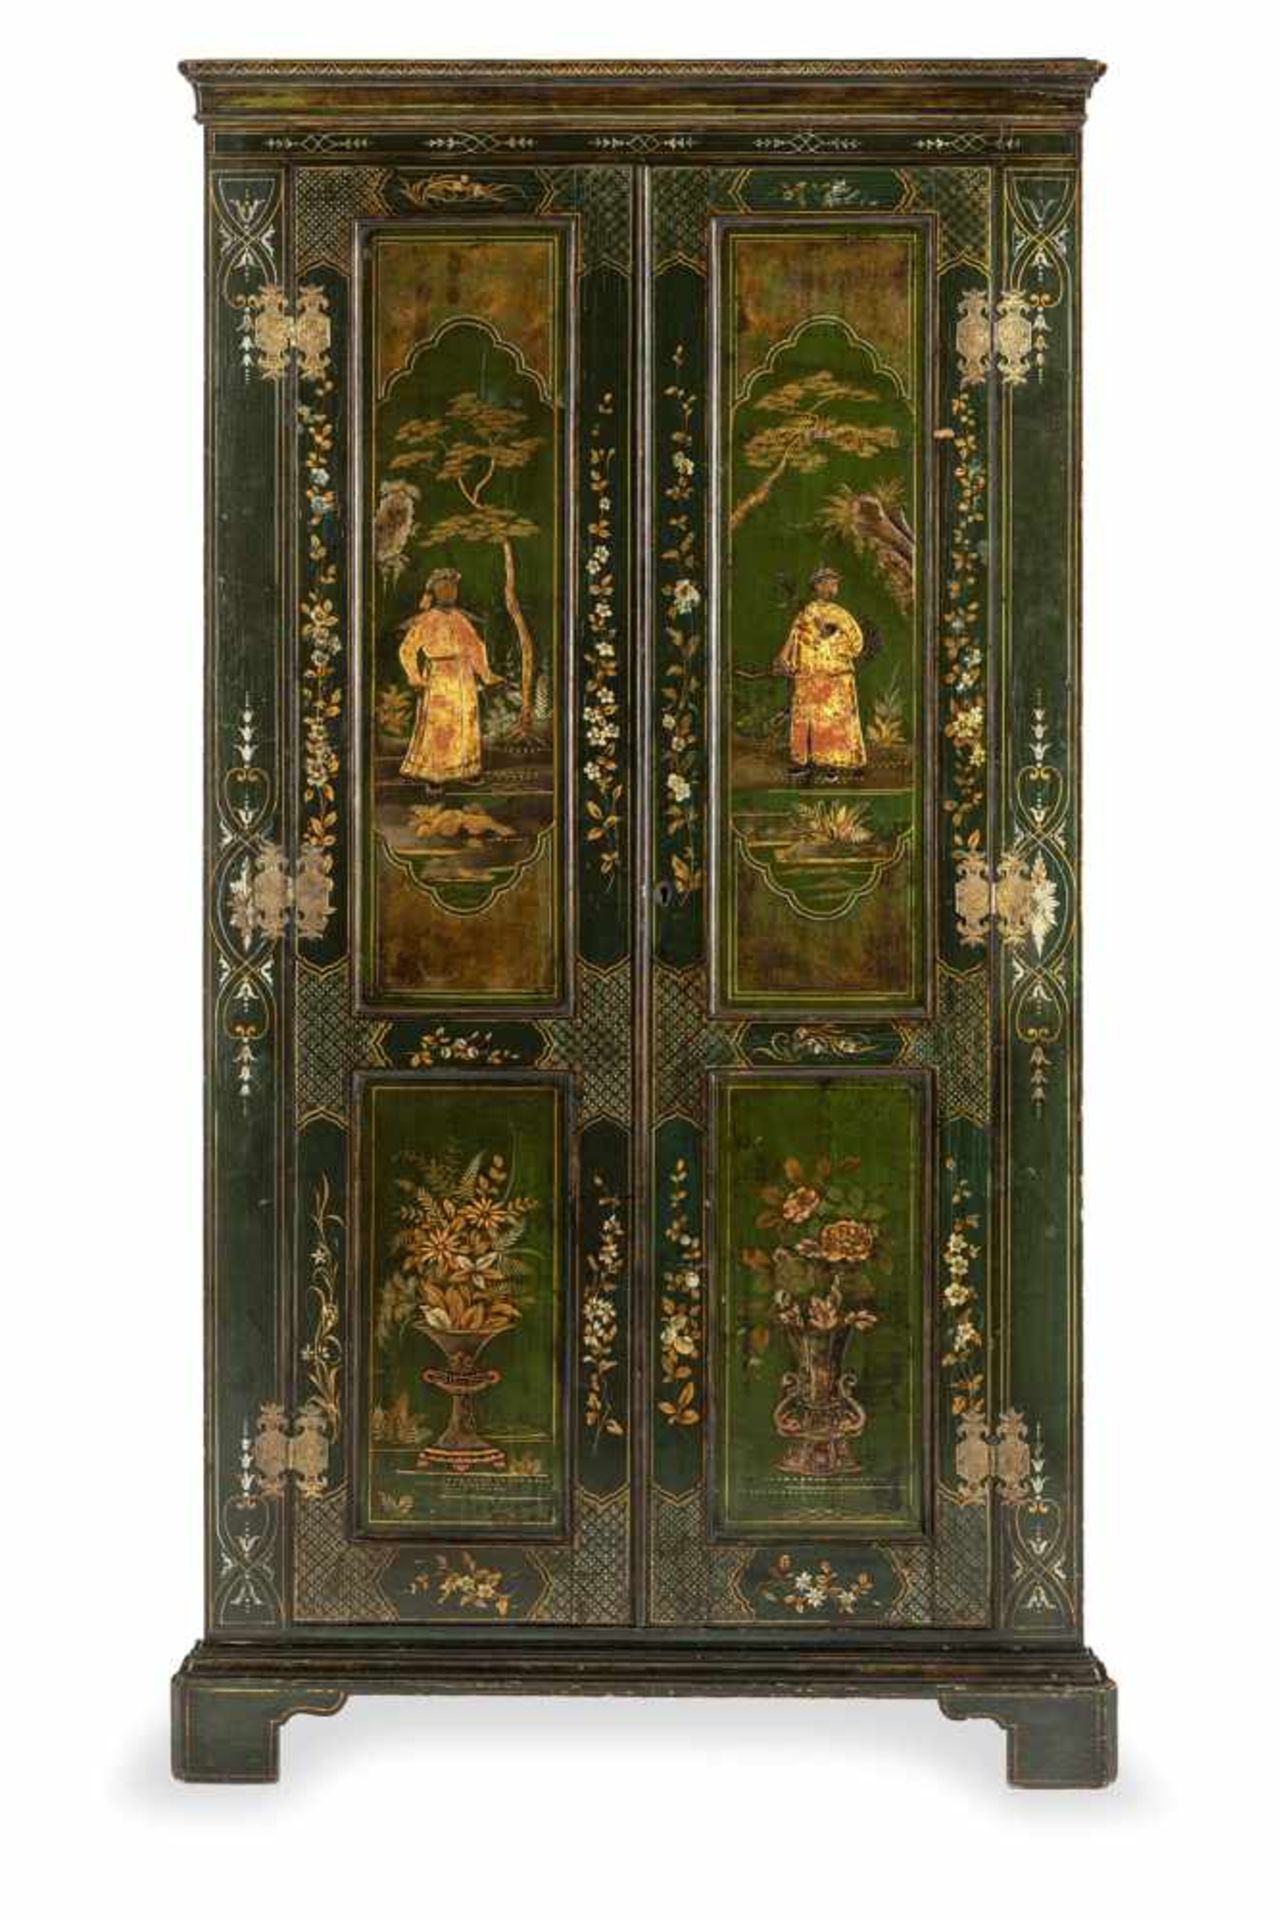 A brass mounted and polychrome lacquered corner cupboard of chinoise style, 19th ct. Rest. Signs